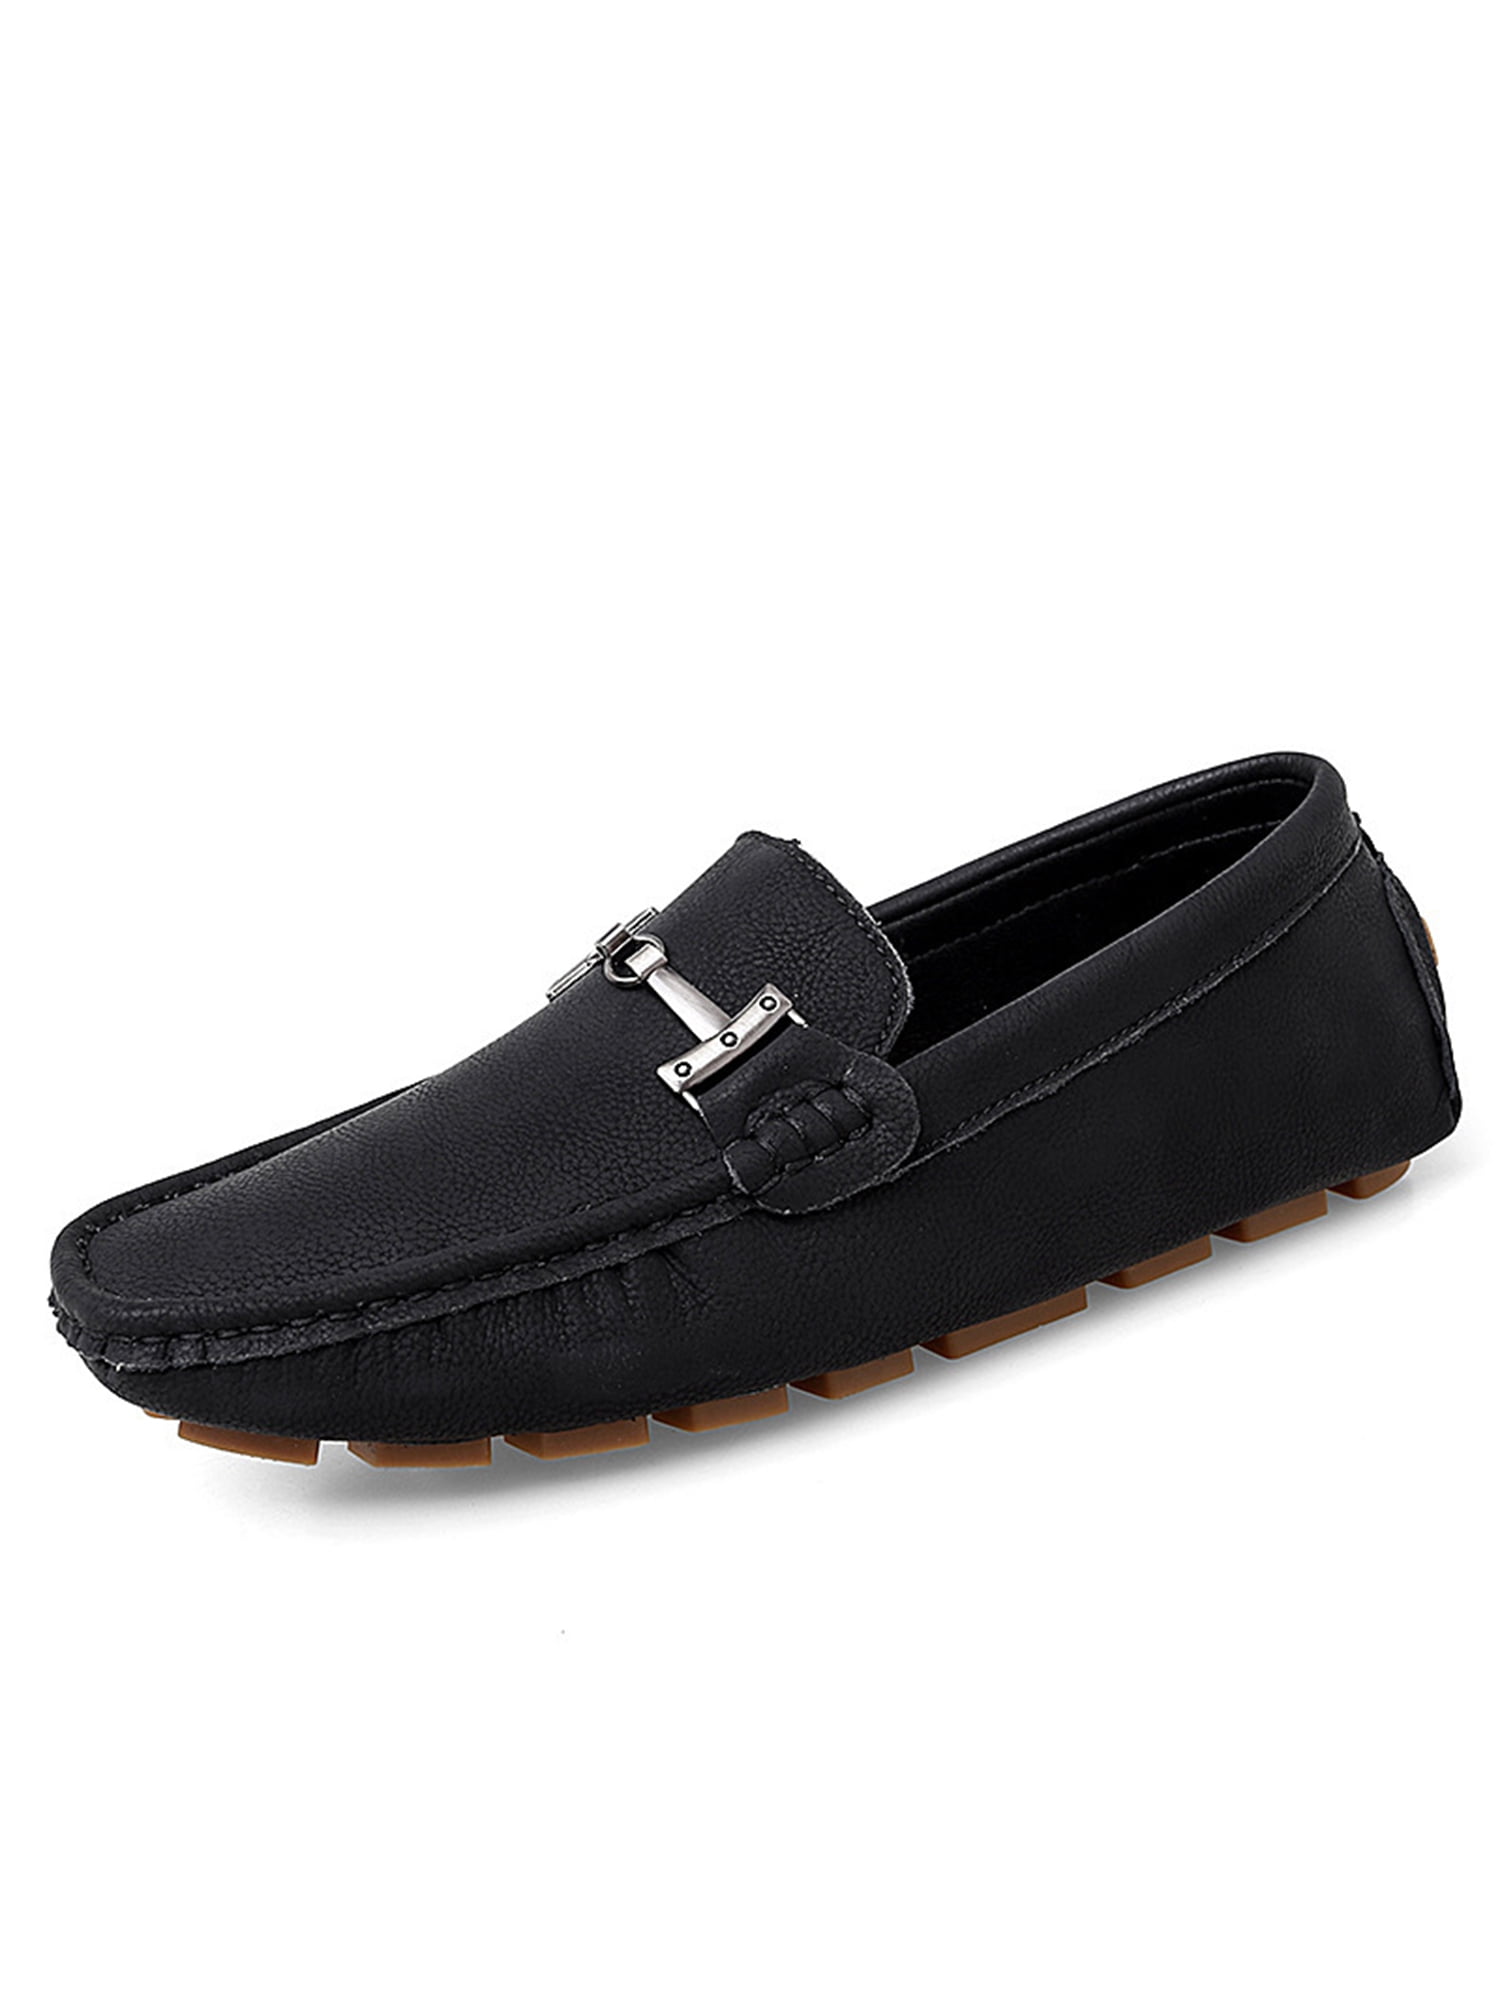 Business Mens Black Casual Leather Shoes Slip On  Moccasin Loafers Boat Shoes 